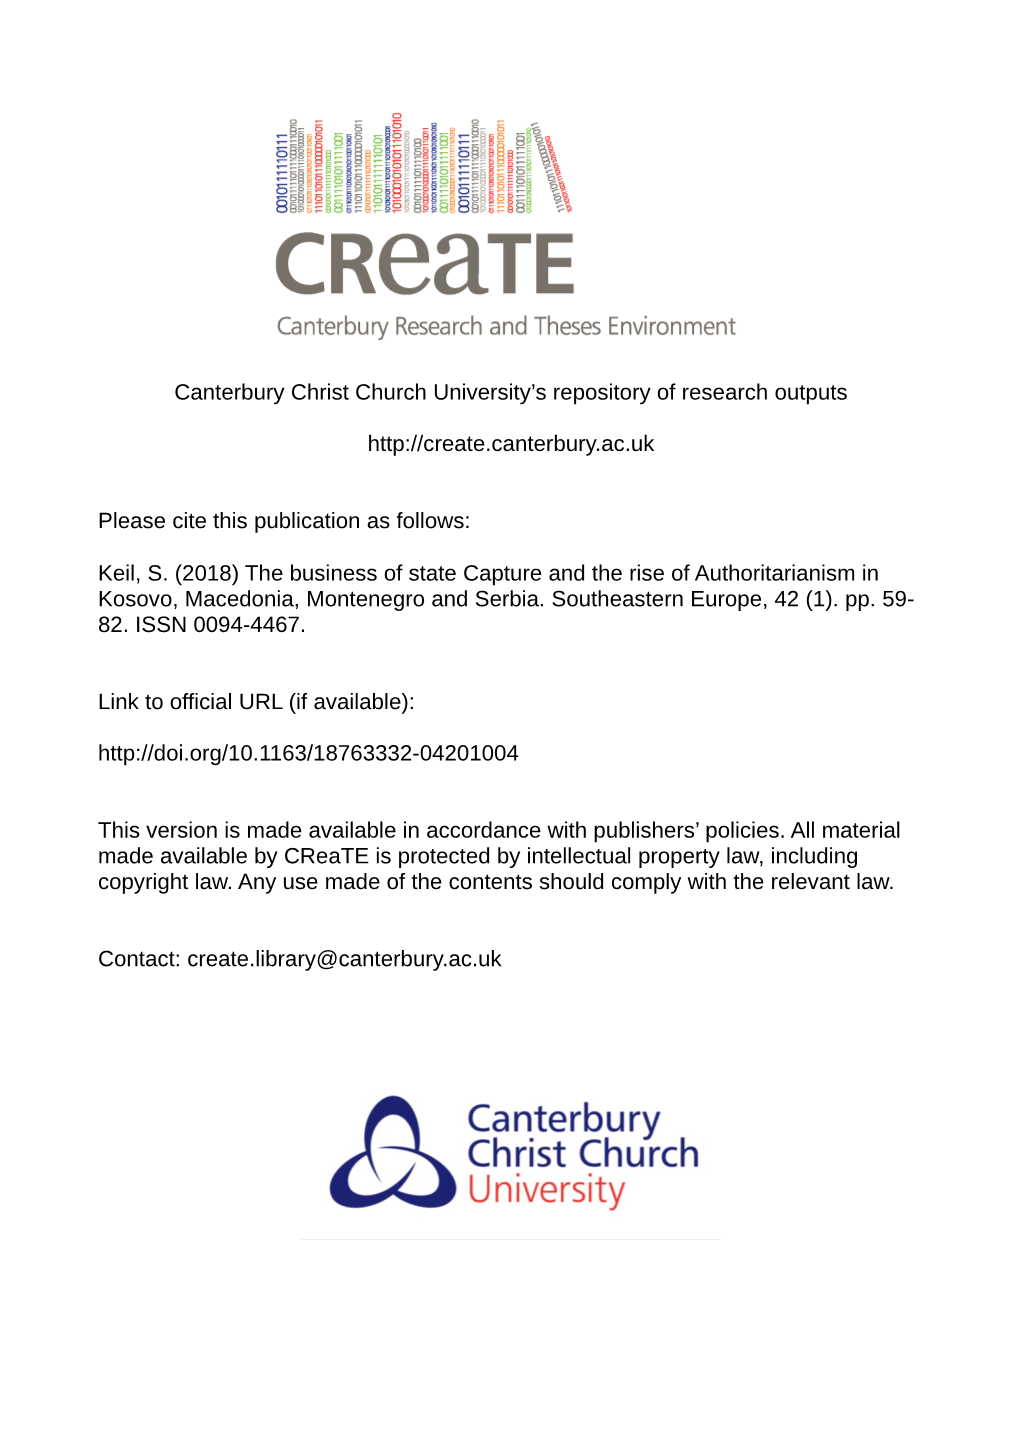 Canterbury Christ Church University's Repository of Research Outputs Http